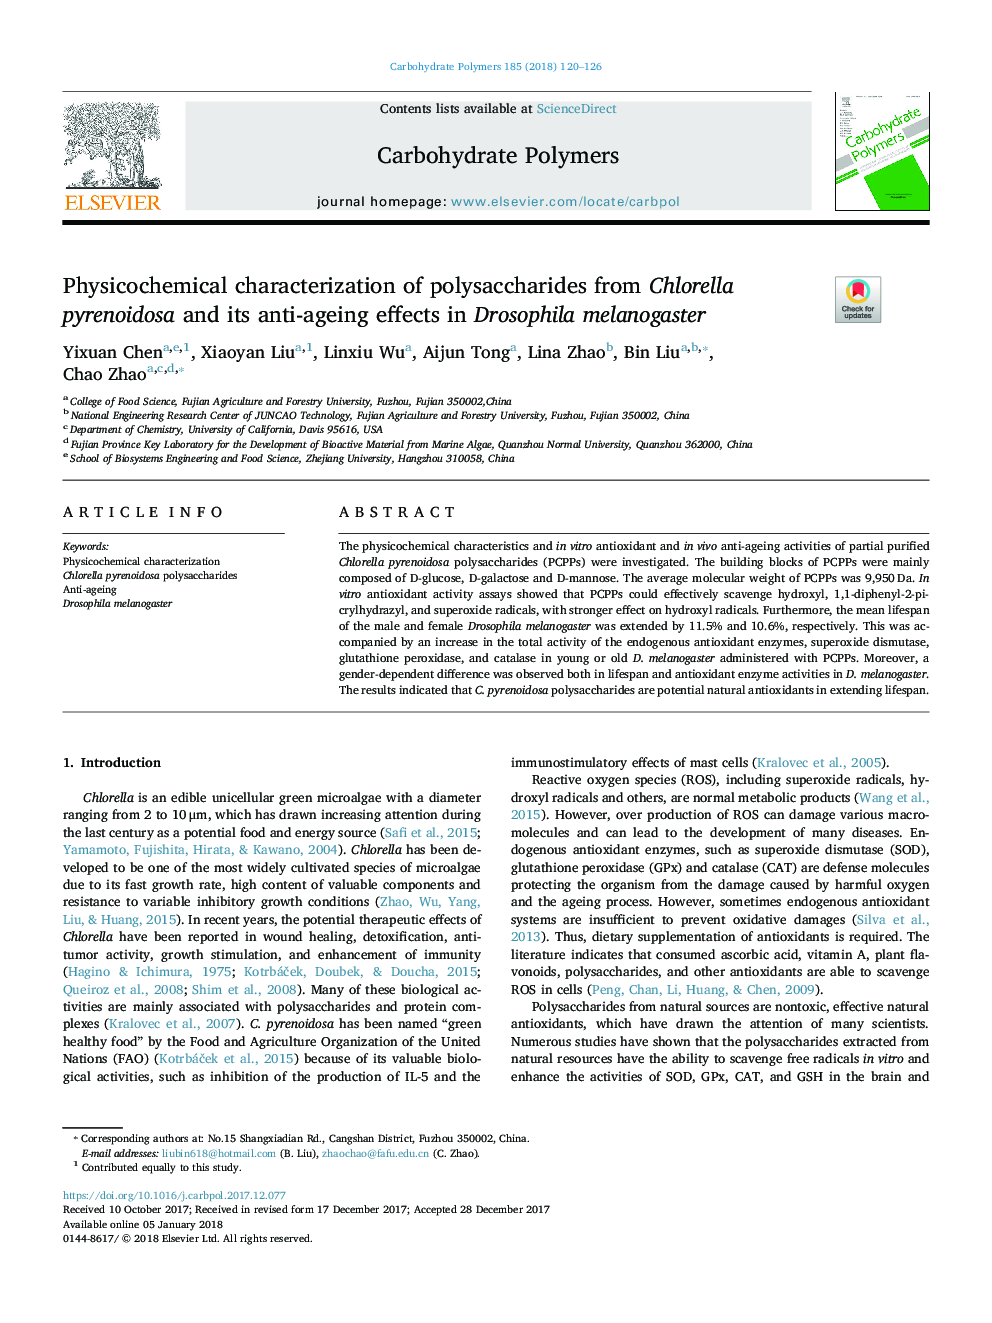 Physicochemical characterization of polysaccharides from Chlorella pyrenoidosa and its anti-ageing effects in Drosophila melanogaster